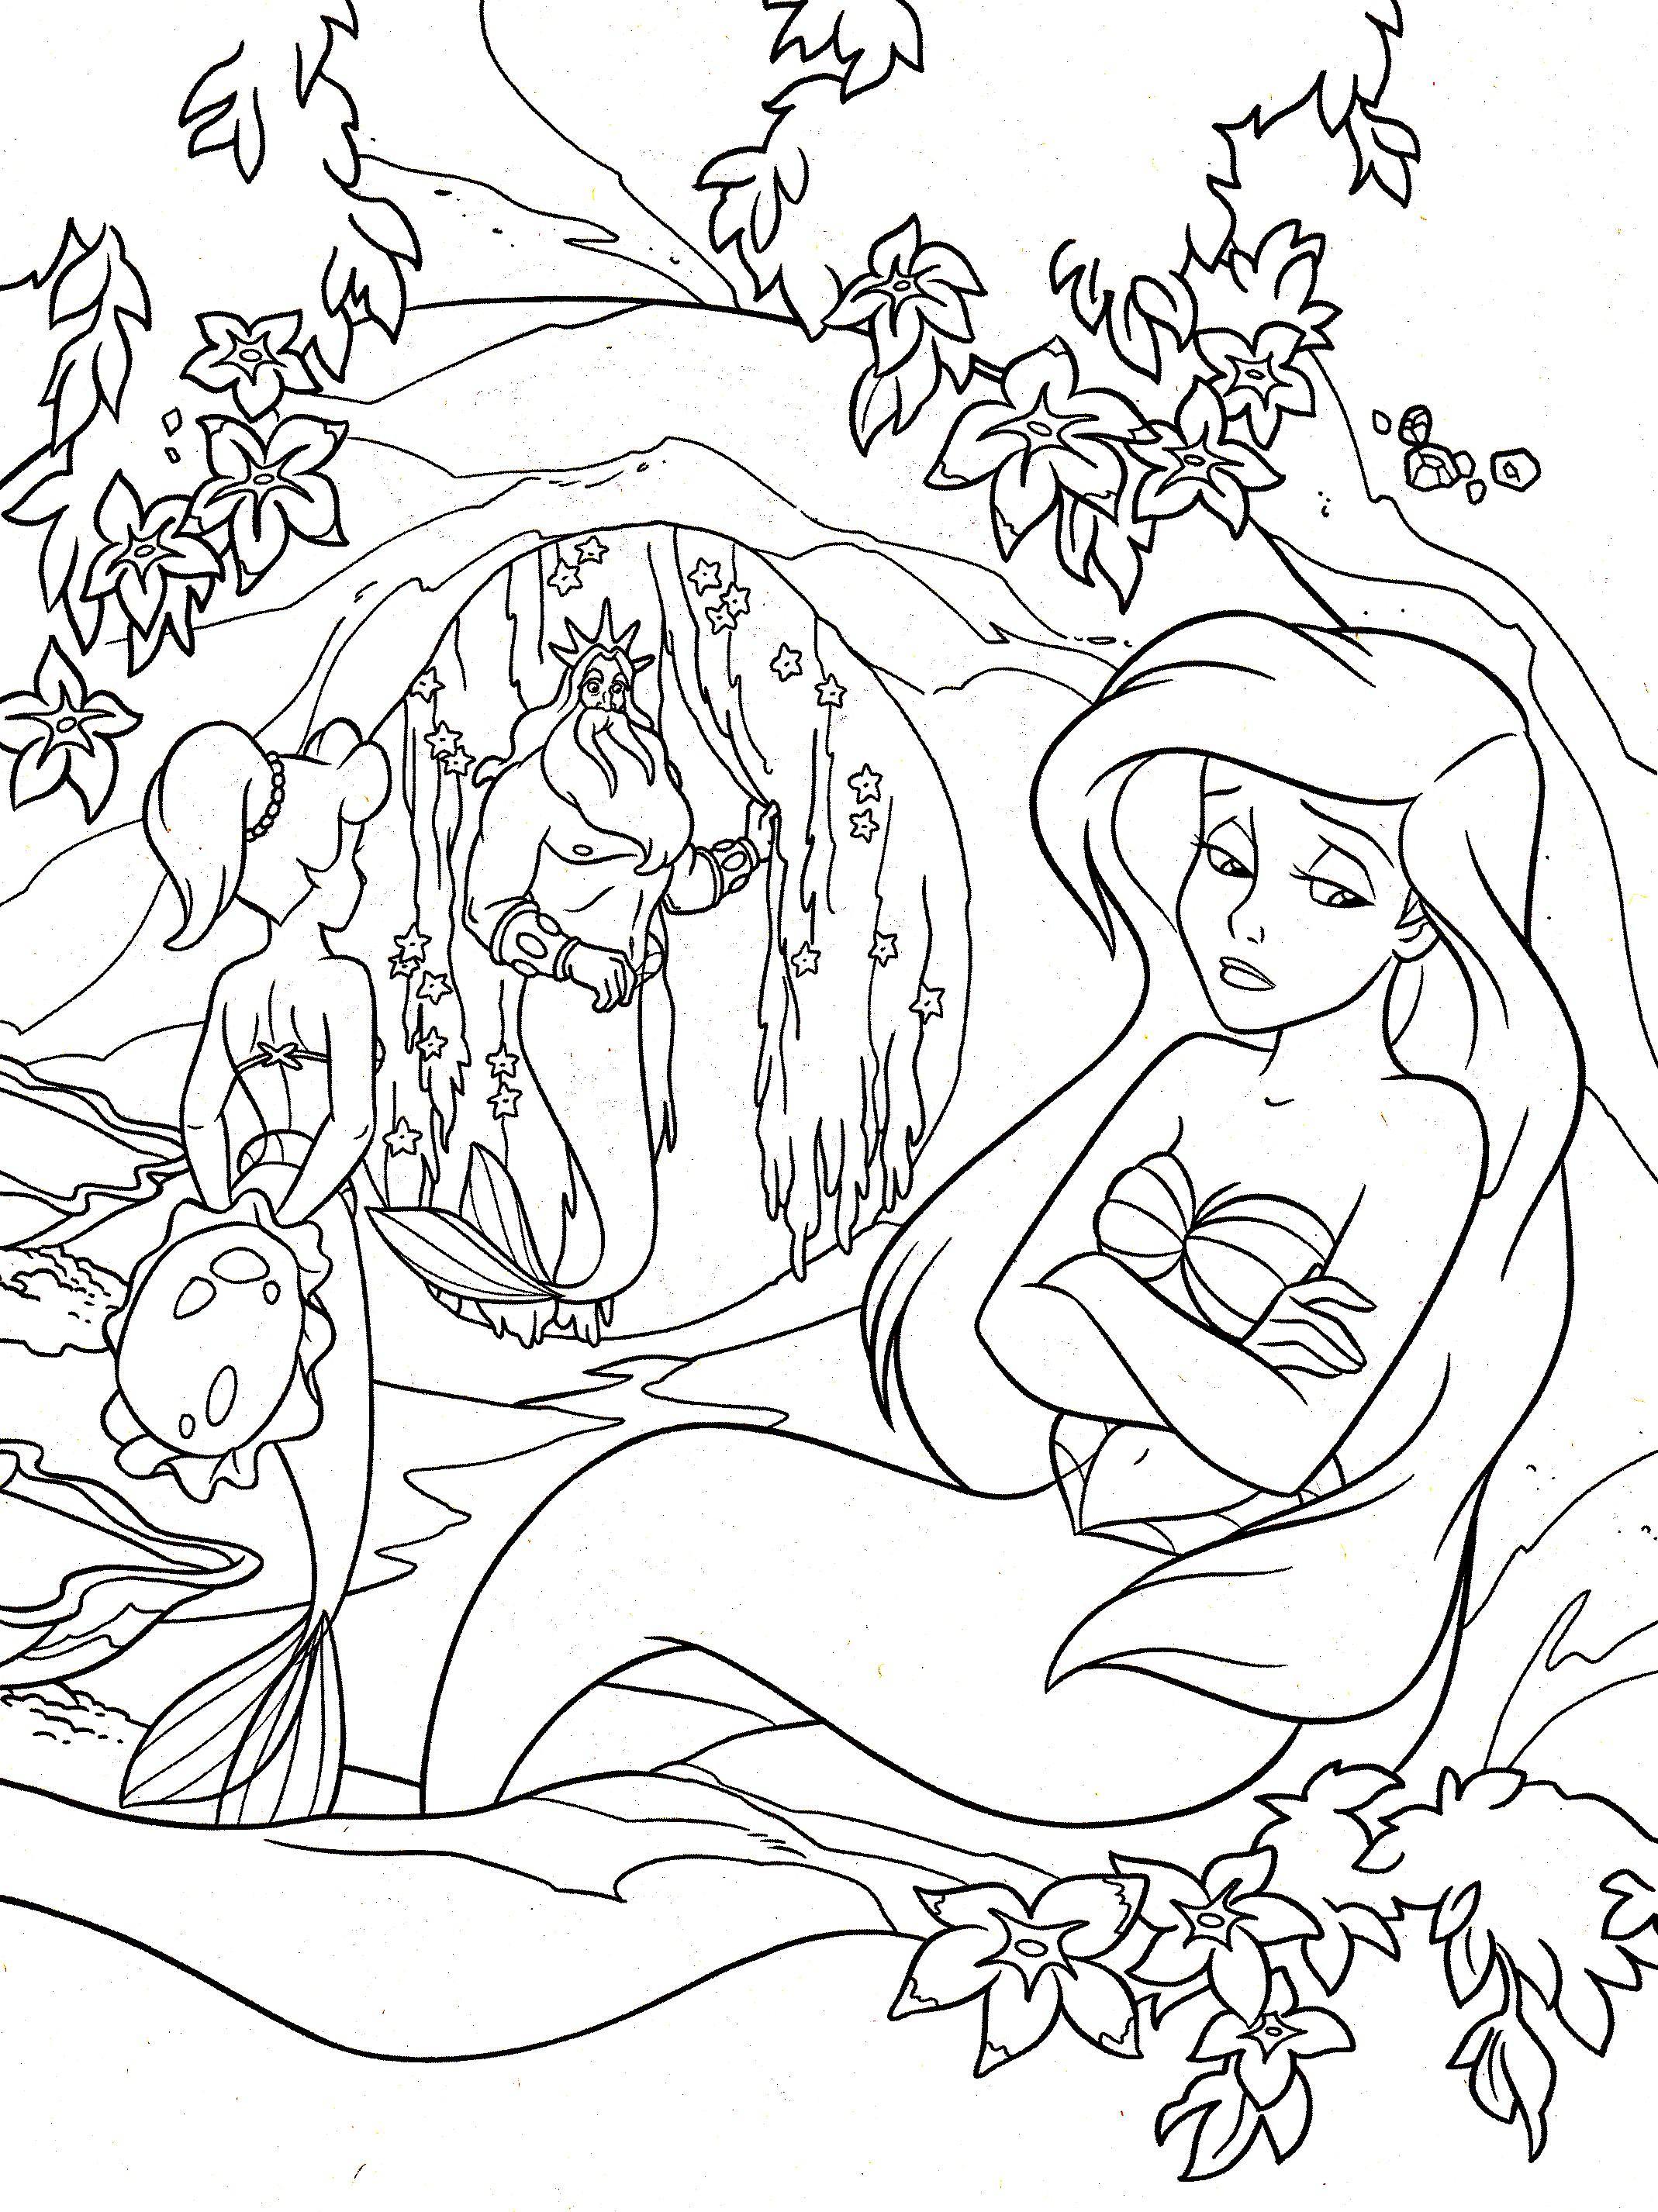 the little mermaid more coloring pages